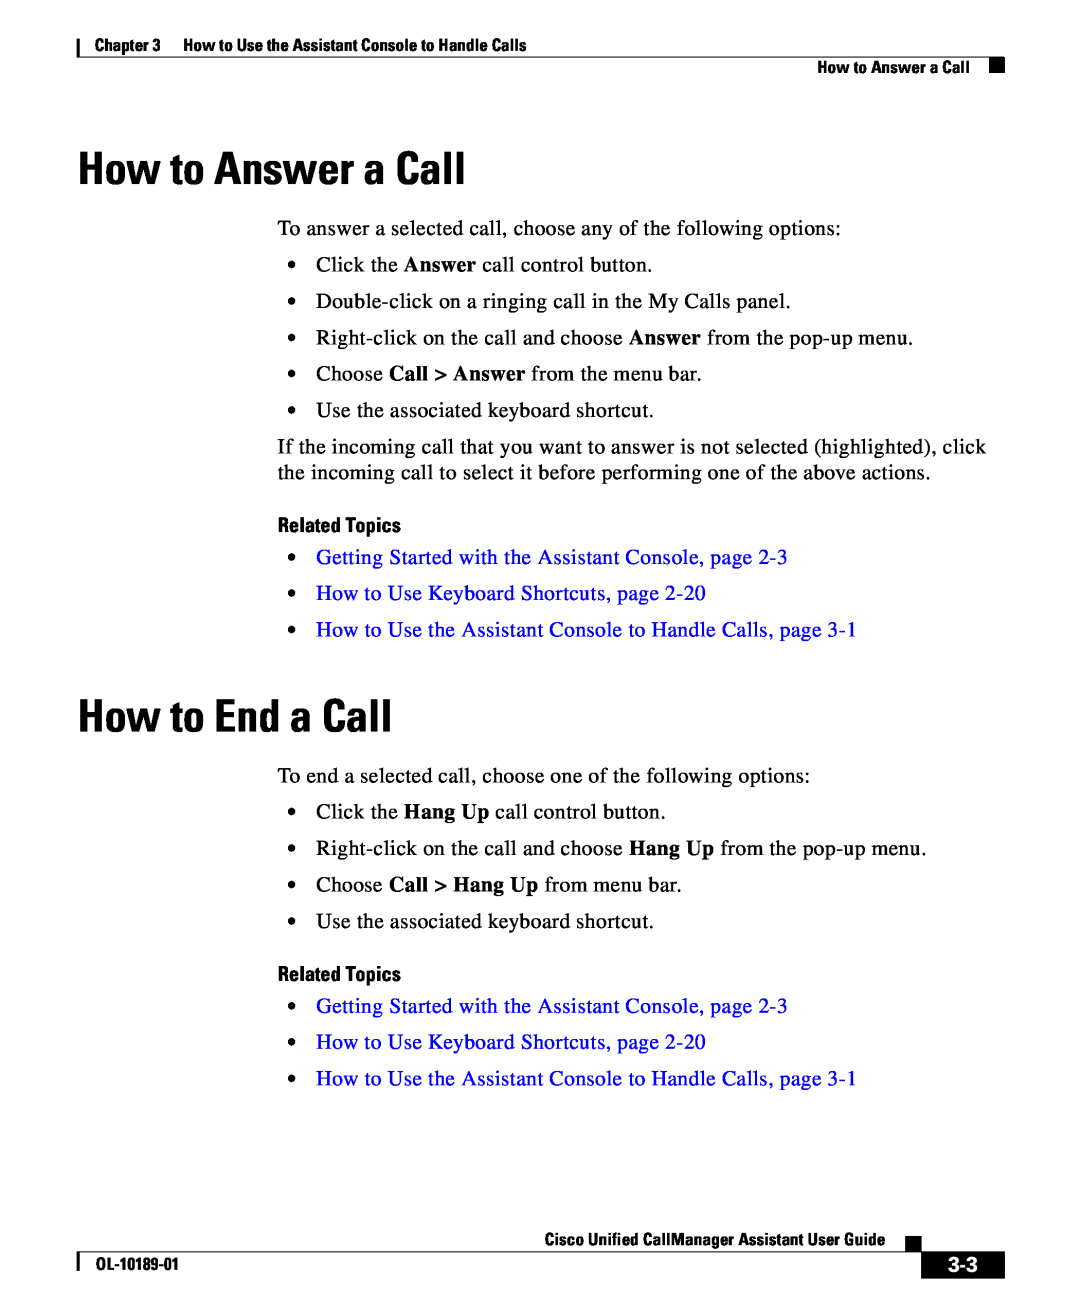 Cisco Systems OL-10189-01 How to Answer a Call, How to End a Call, Related Topics, How to Use Keyboard Shortcuts, page 